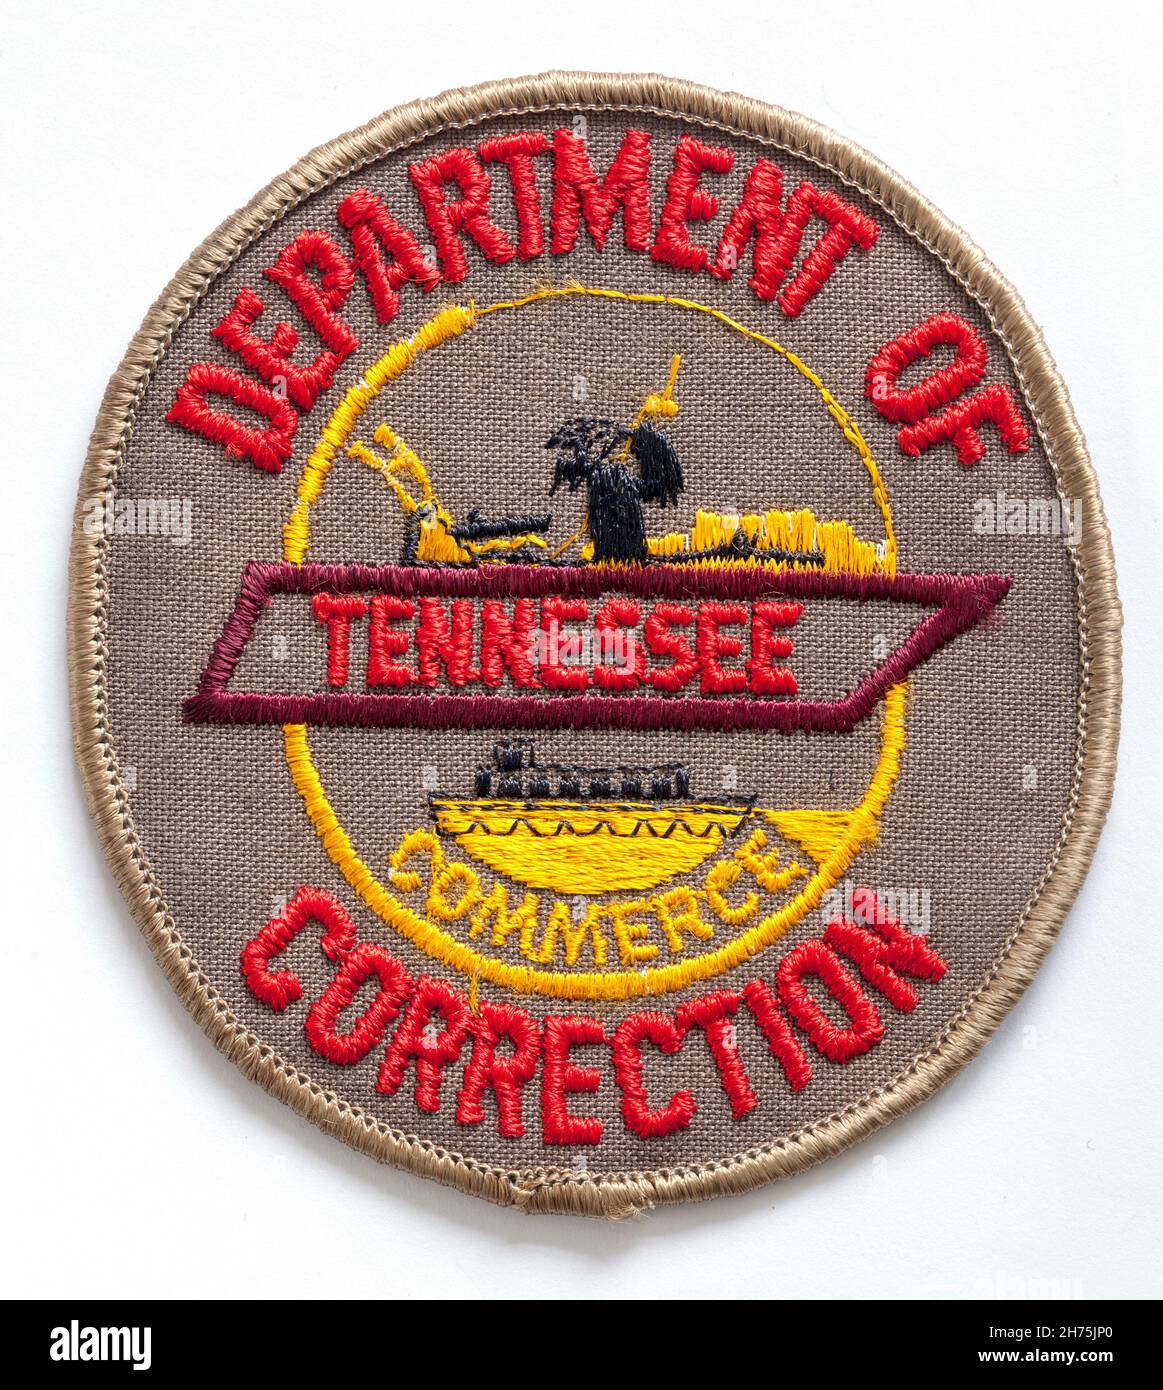 Vintage Department of Correction Tennessee Prison Officer Badge Patch Stock Photo